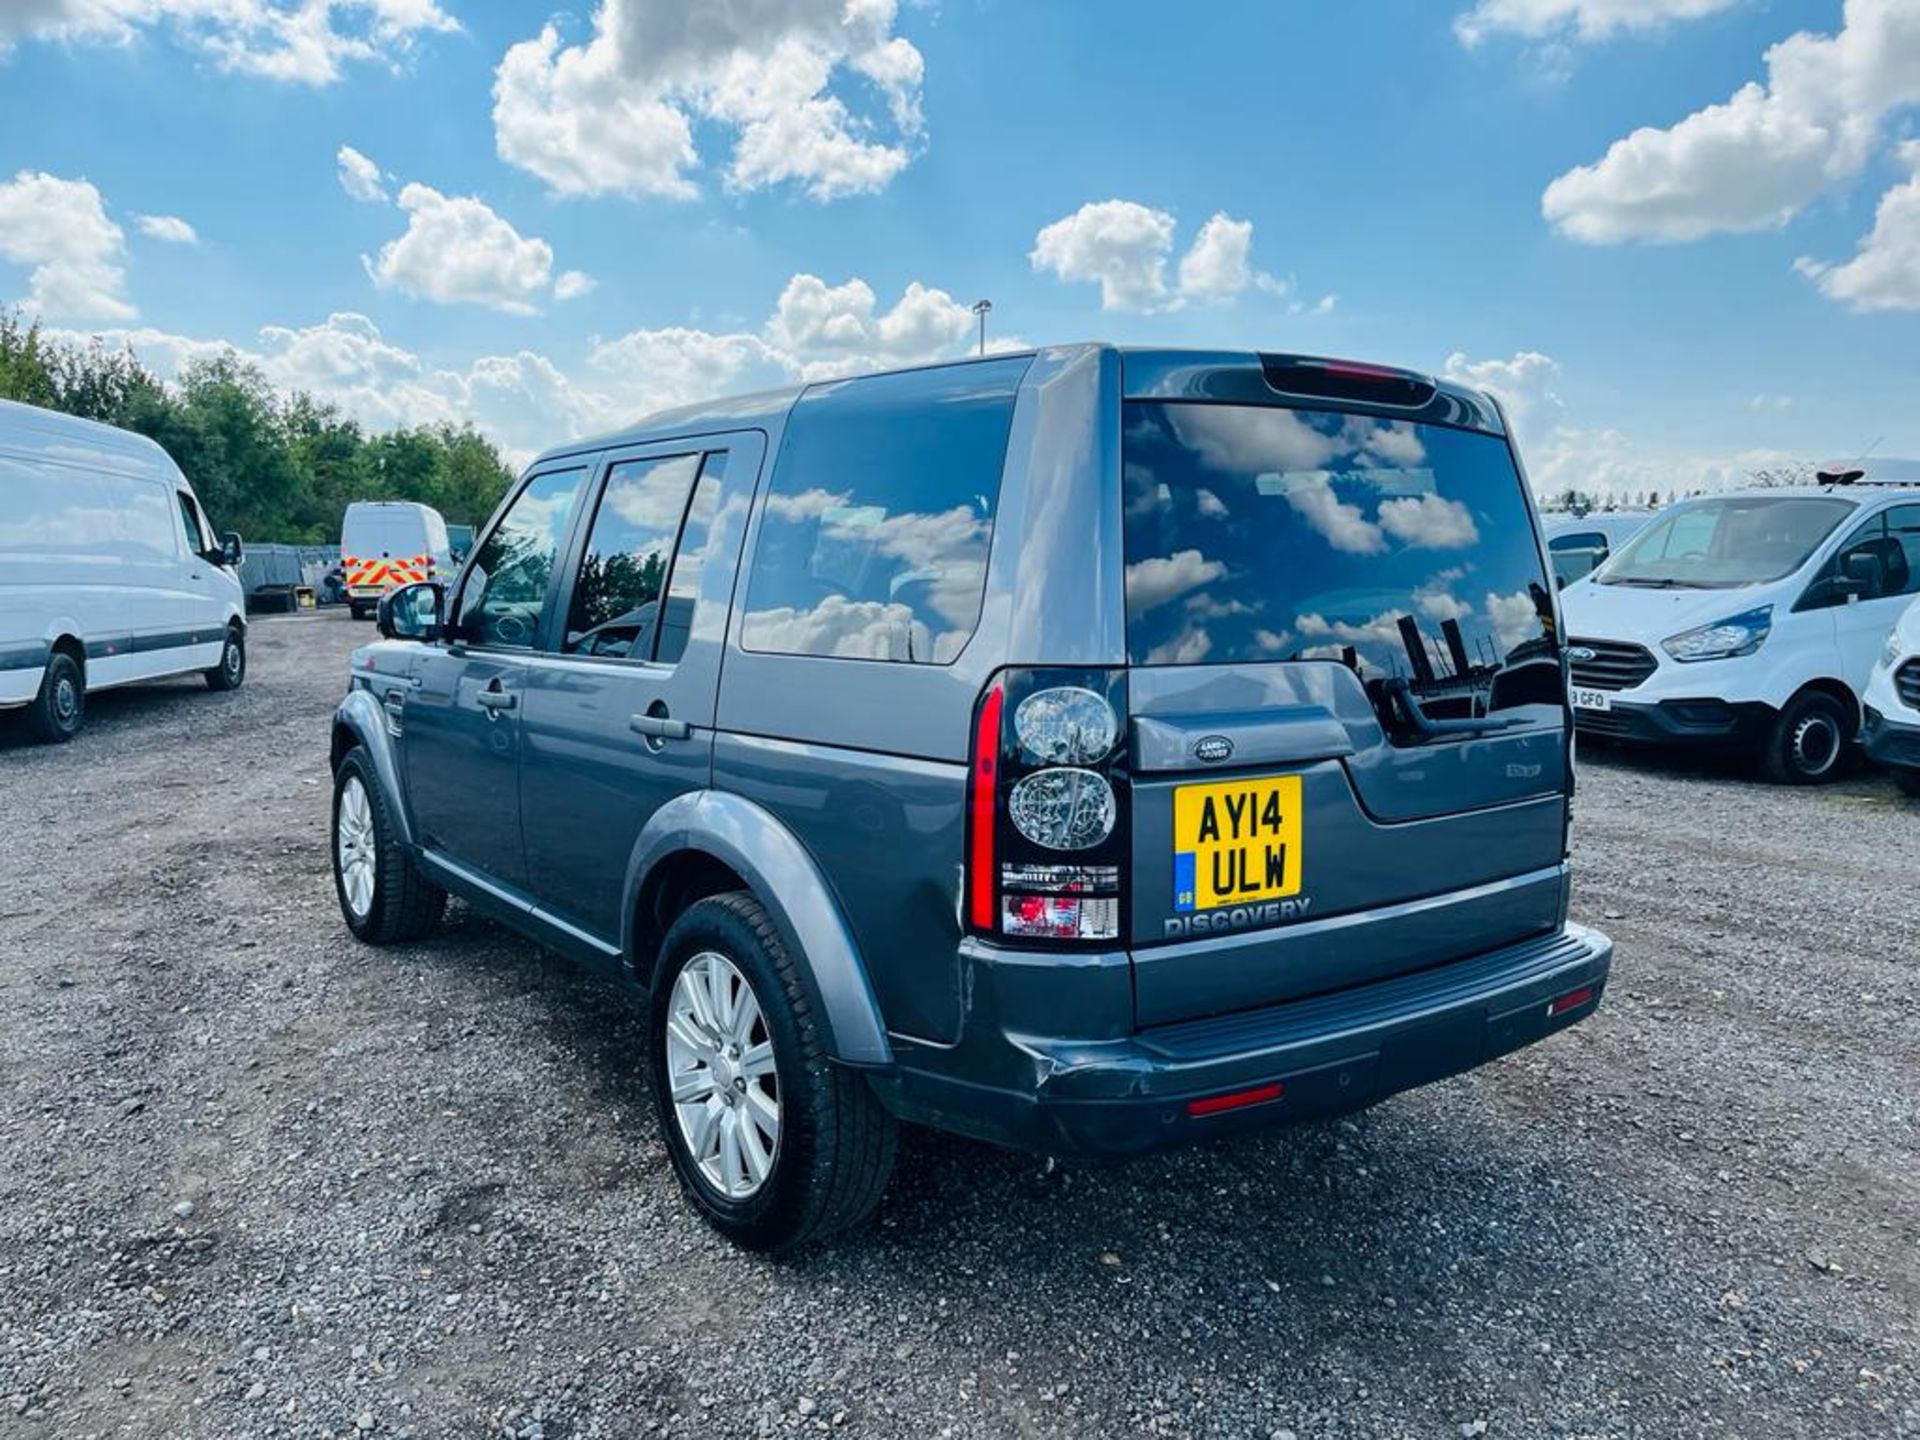 ** ON SALE ** Land Rover Discovery 4 3.0 SDV6 XS CommandShift 2014 '14 Reg' Sat Nav - A/C - 4WD - Image 5 of 26